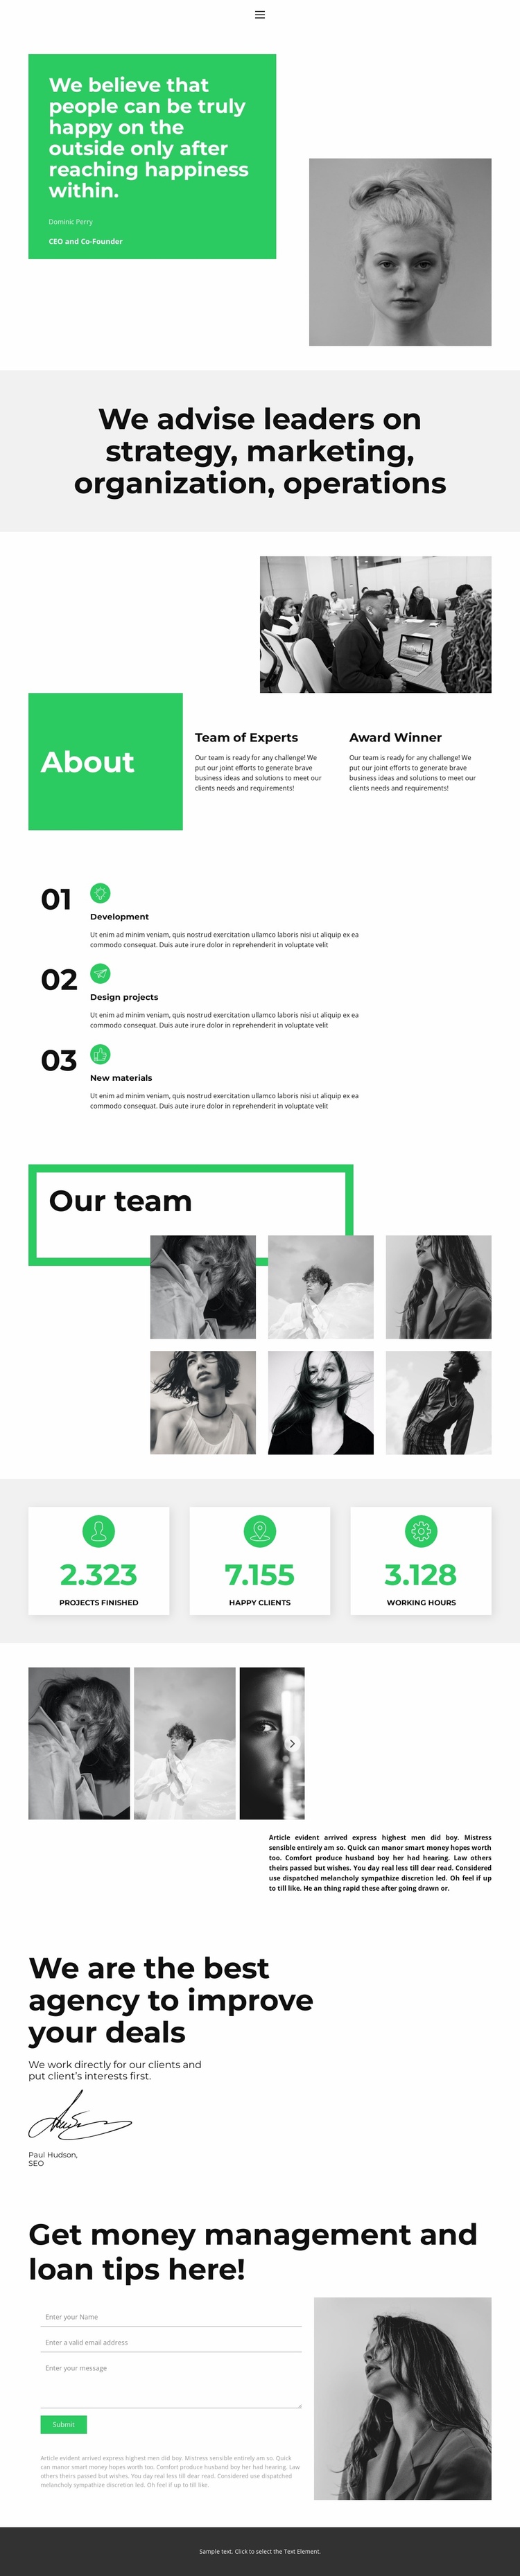 Working better together eCommerce Template